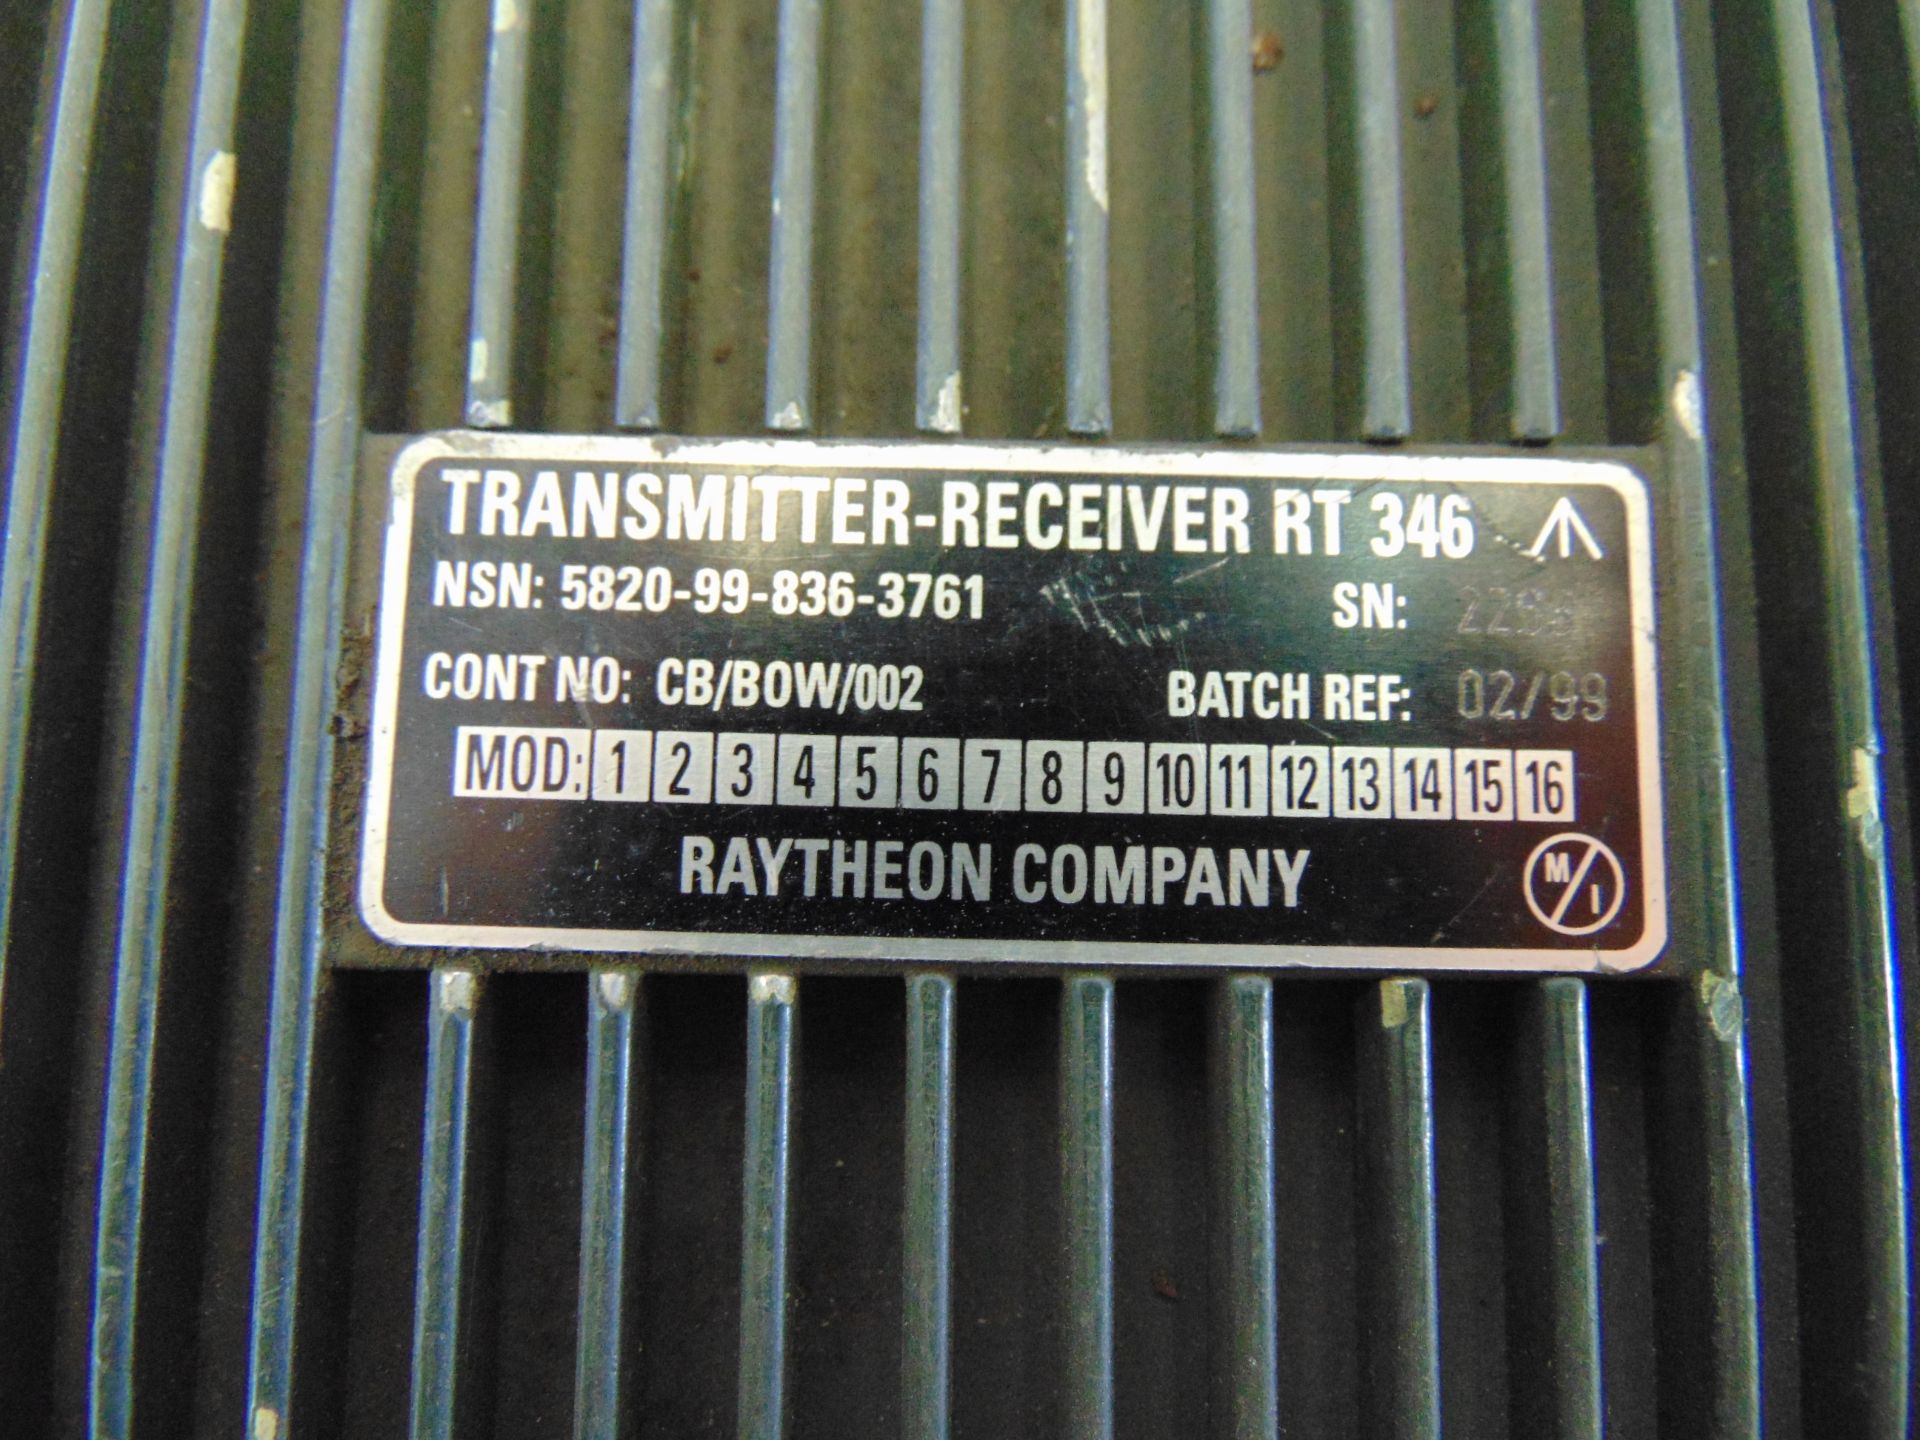 TRANSMITTER RECIEVER RT 346 READ OUT CRACKED - Image 5 of 5